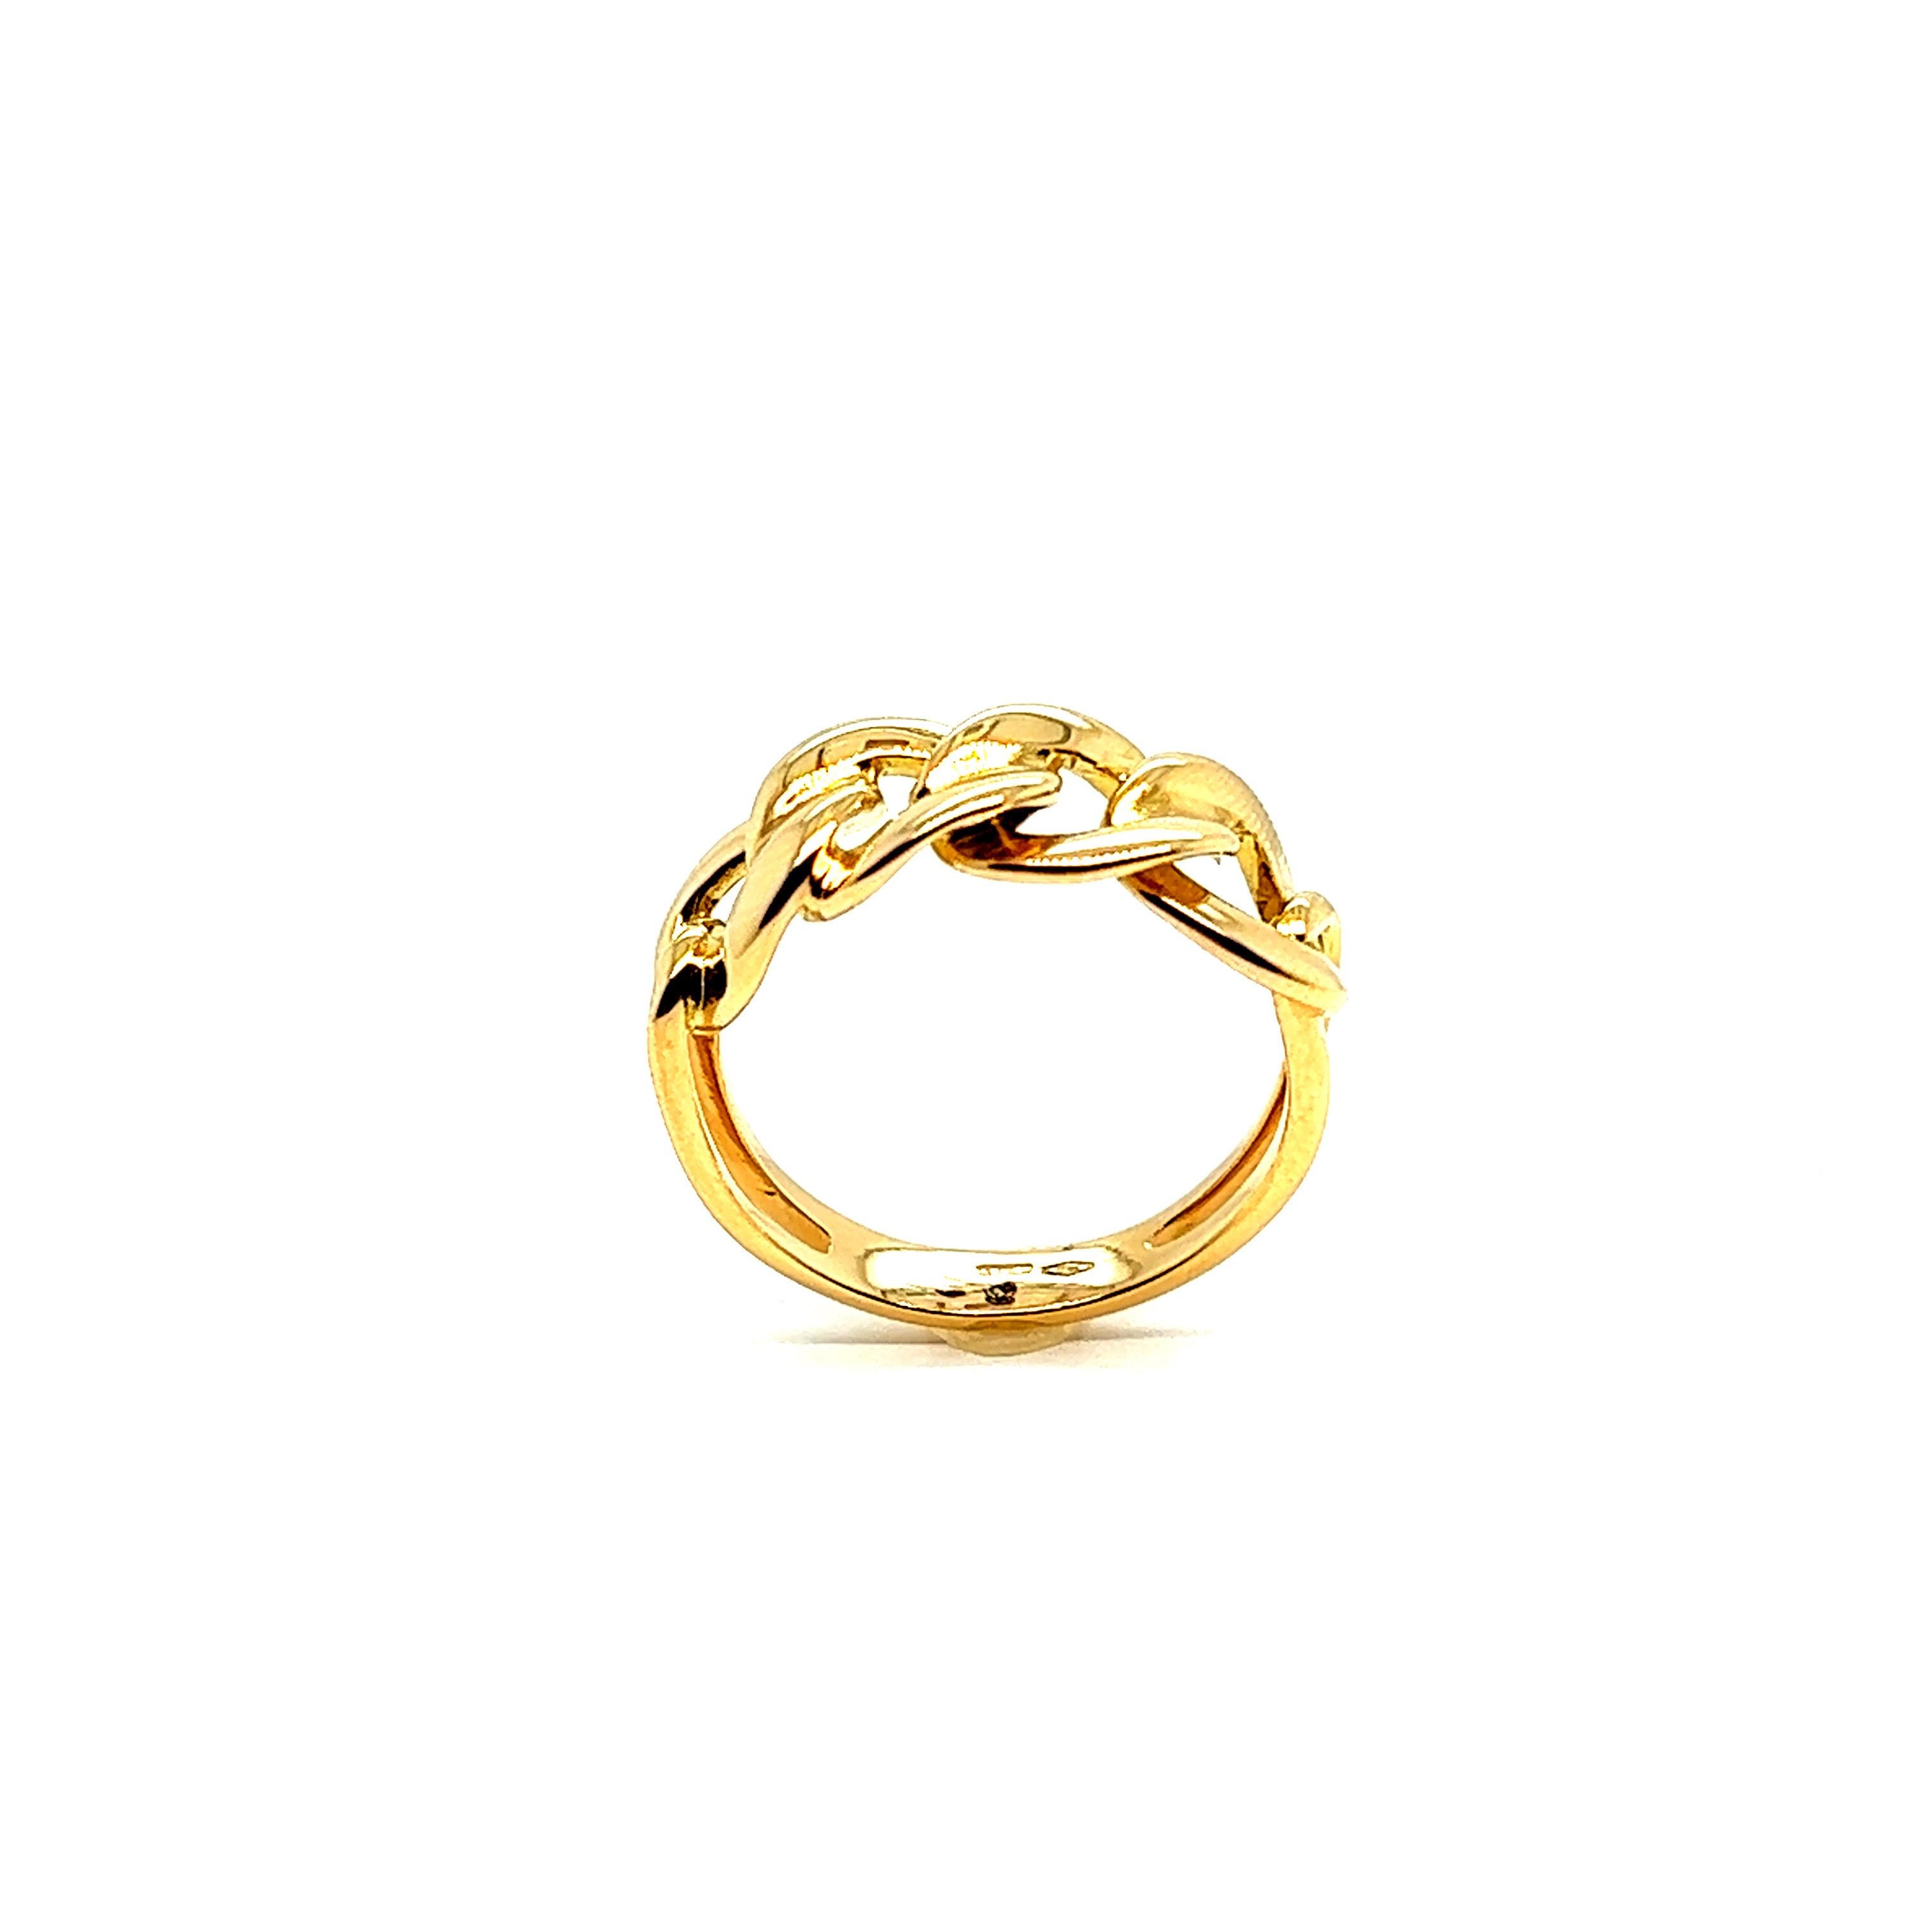 French Ring 4 Small Braided Rings Yellow Gold 18 Karat For Sale 1